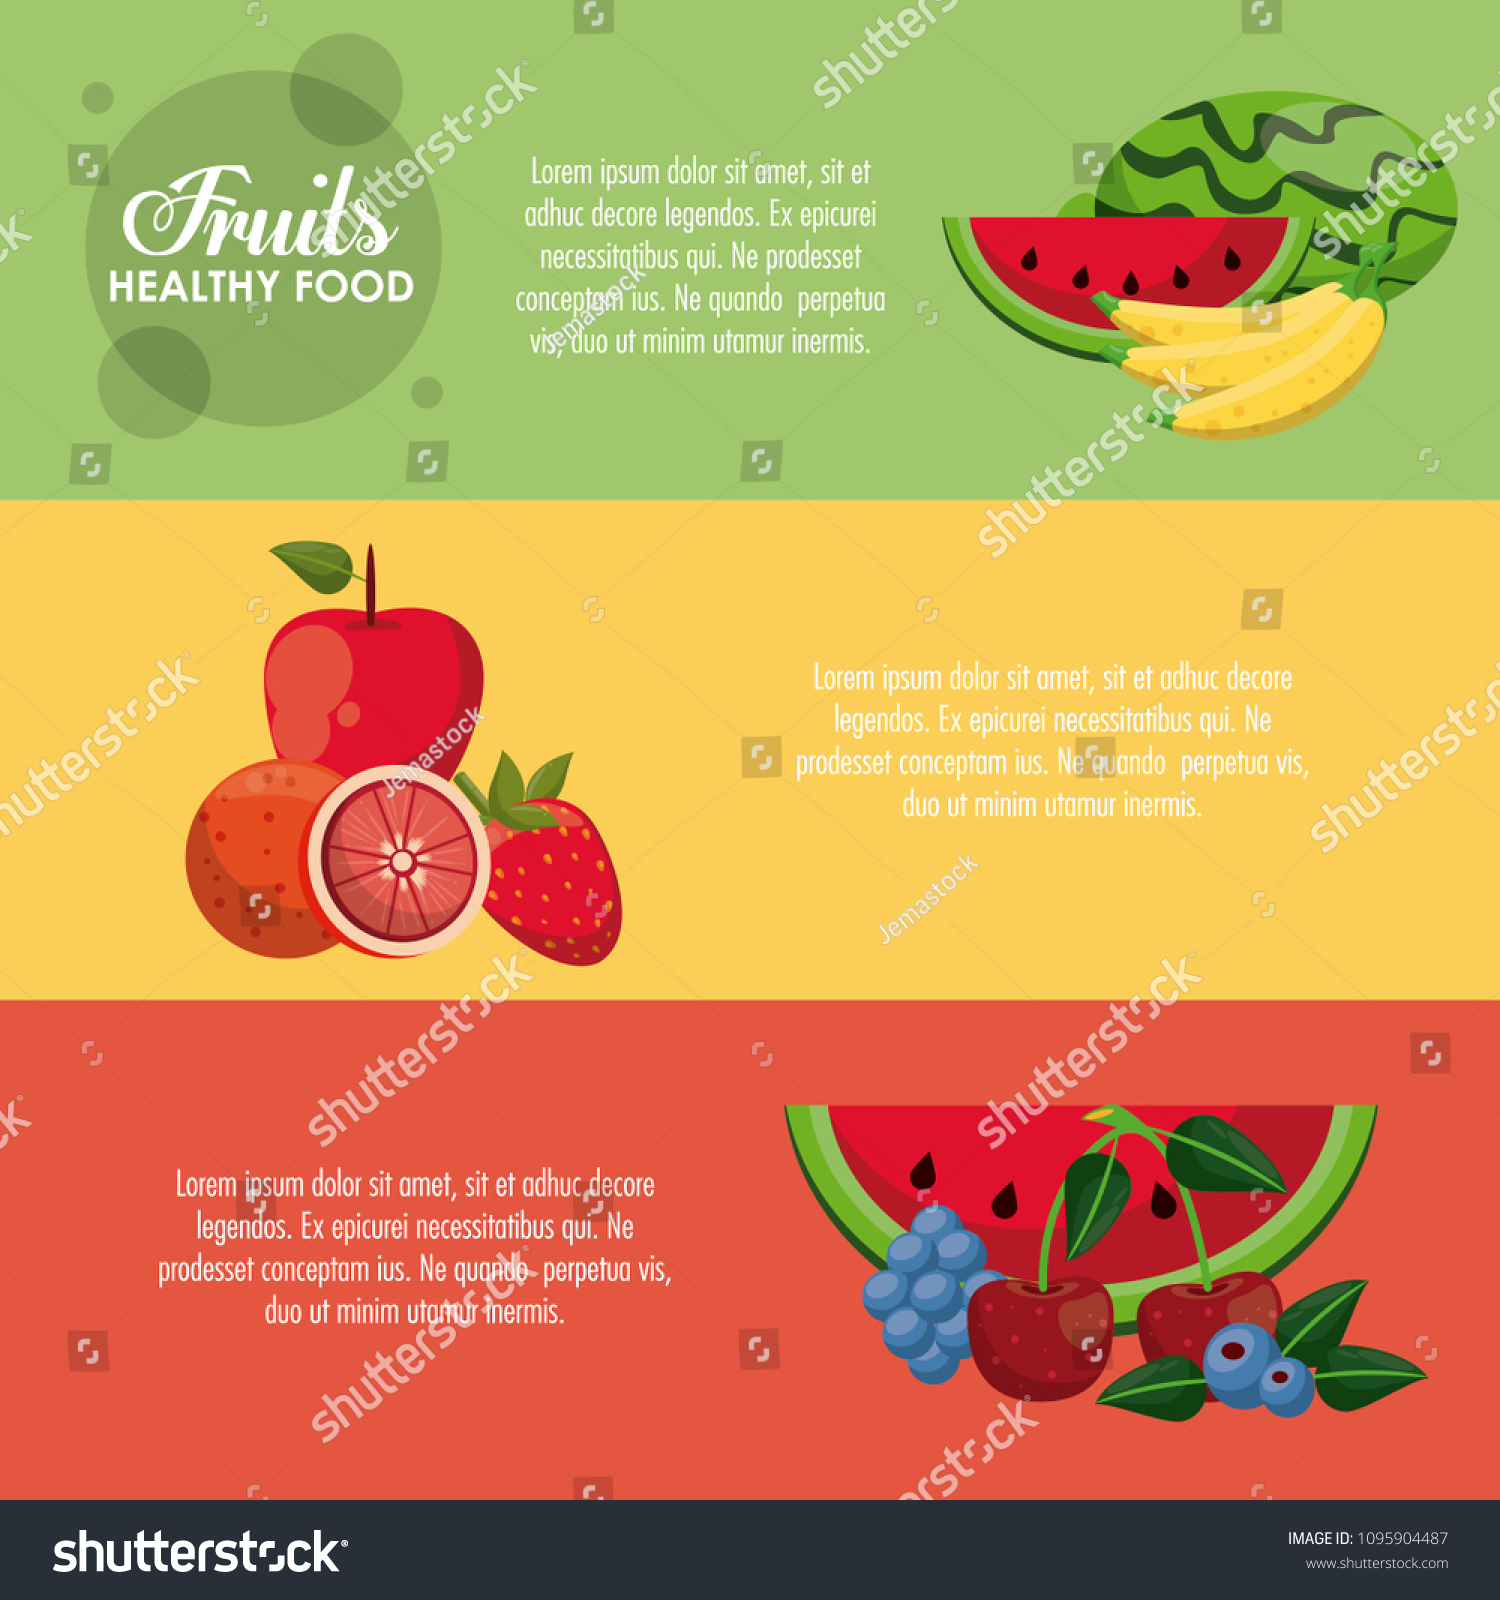 Healthy Food Infographic Stock Vector Royalty Free 1095904487 Shutterstock 5430